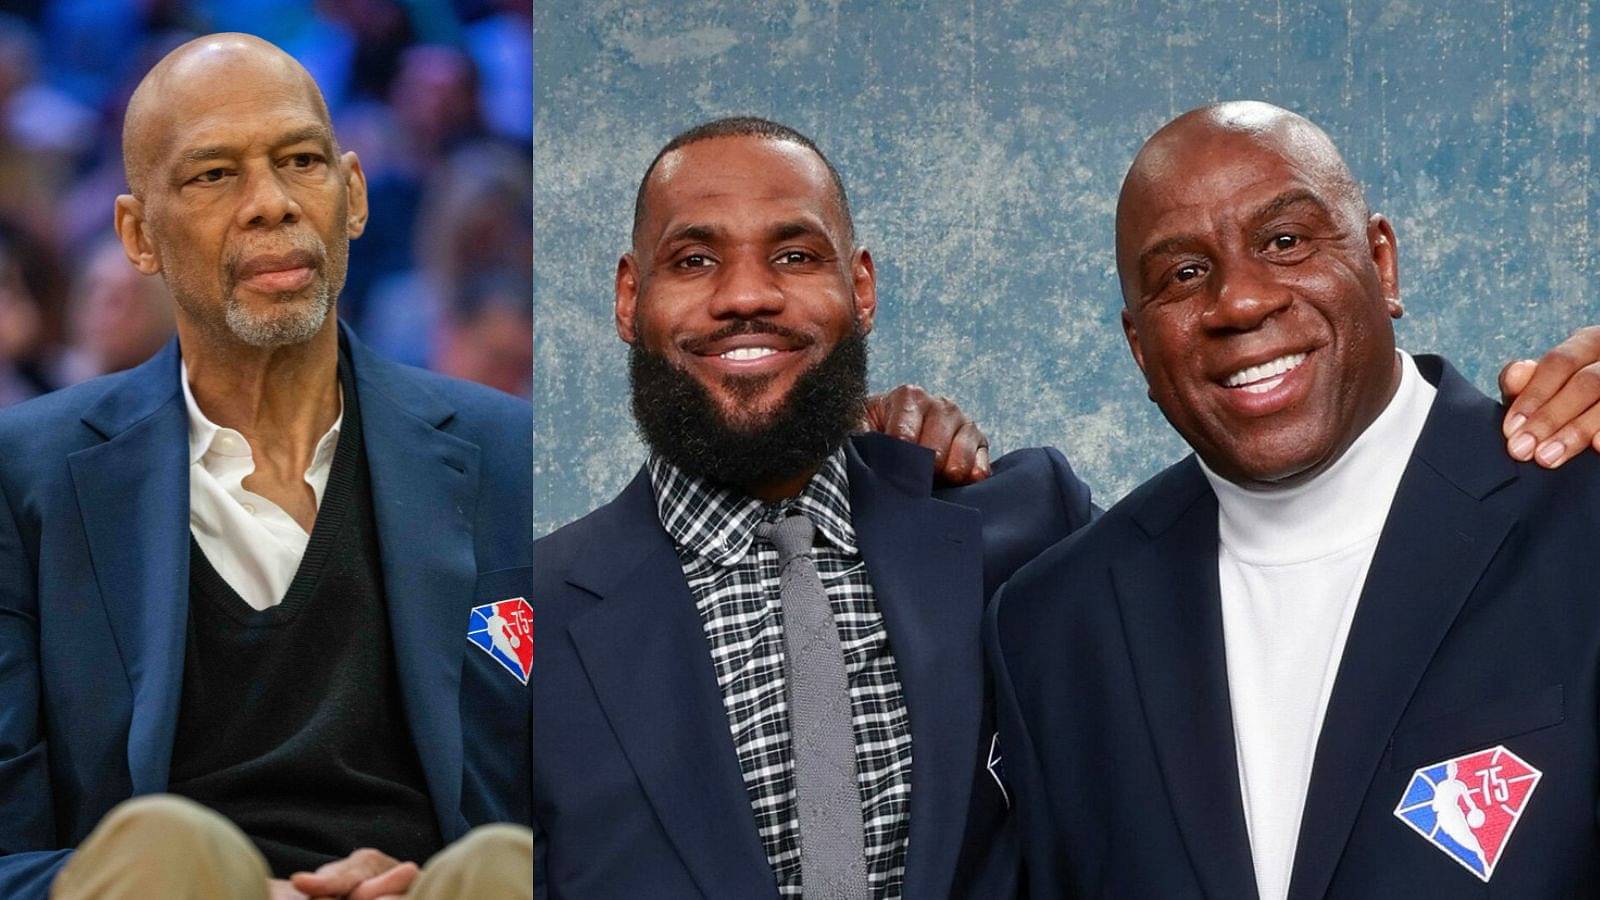 “LeBron James Passing up Magic Johnson and Kareem Abdul-Jabbar in Same Season is Insane”: NBA Twitter is Excited For Lakers Superstar’s 2022-23 season